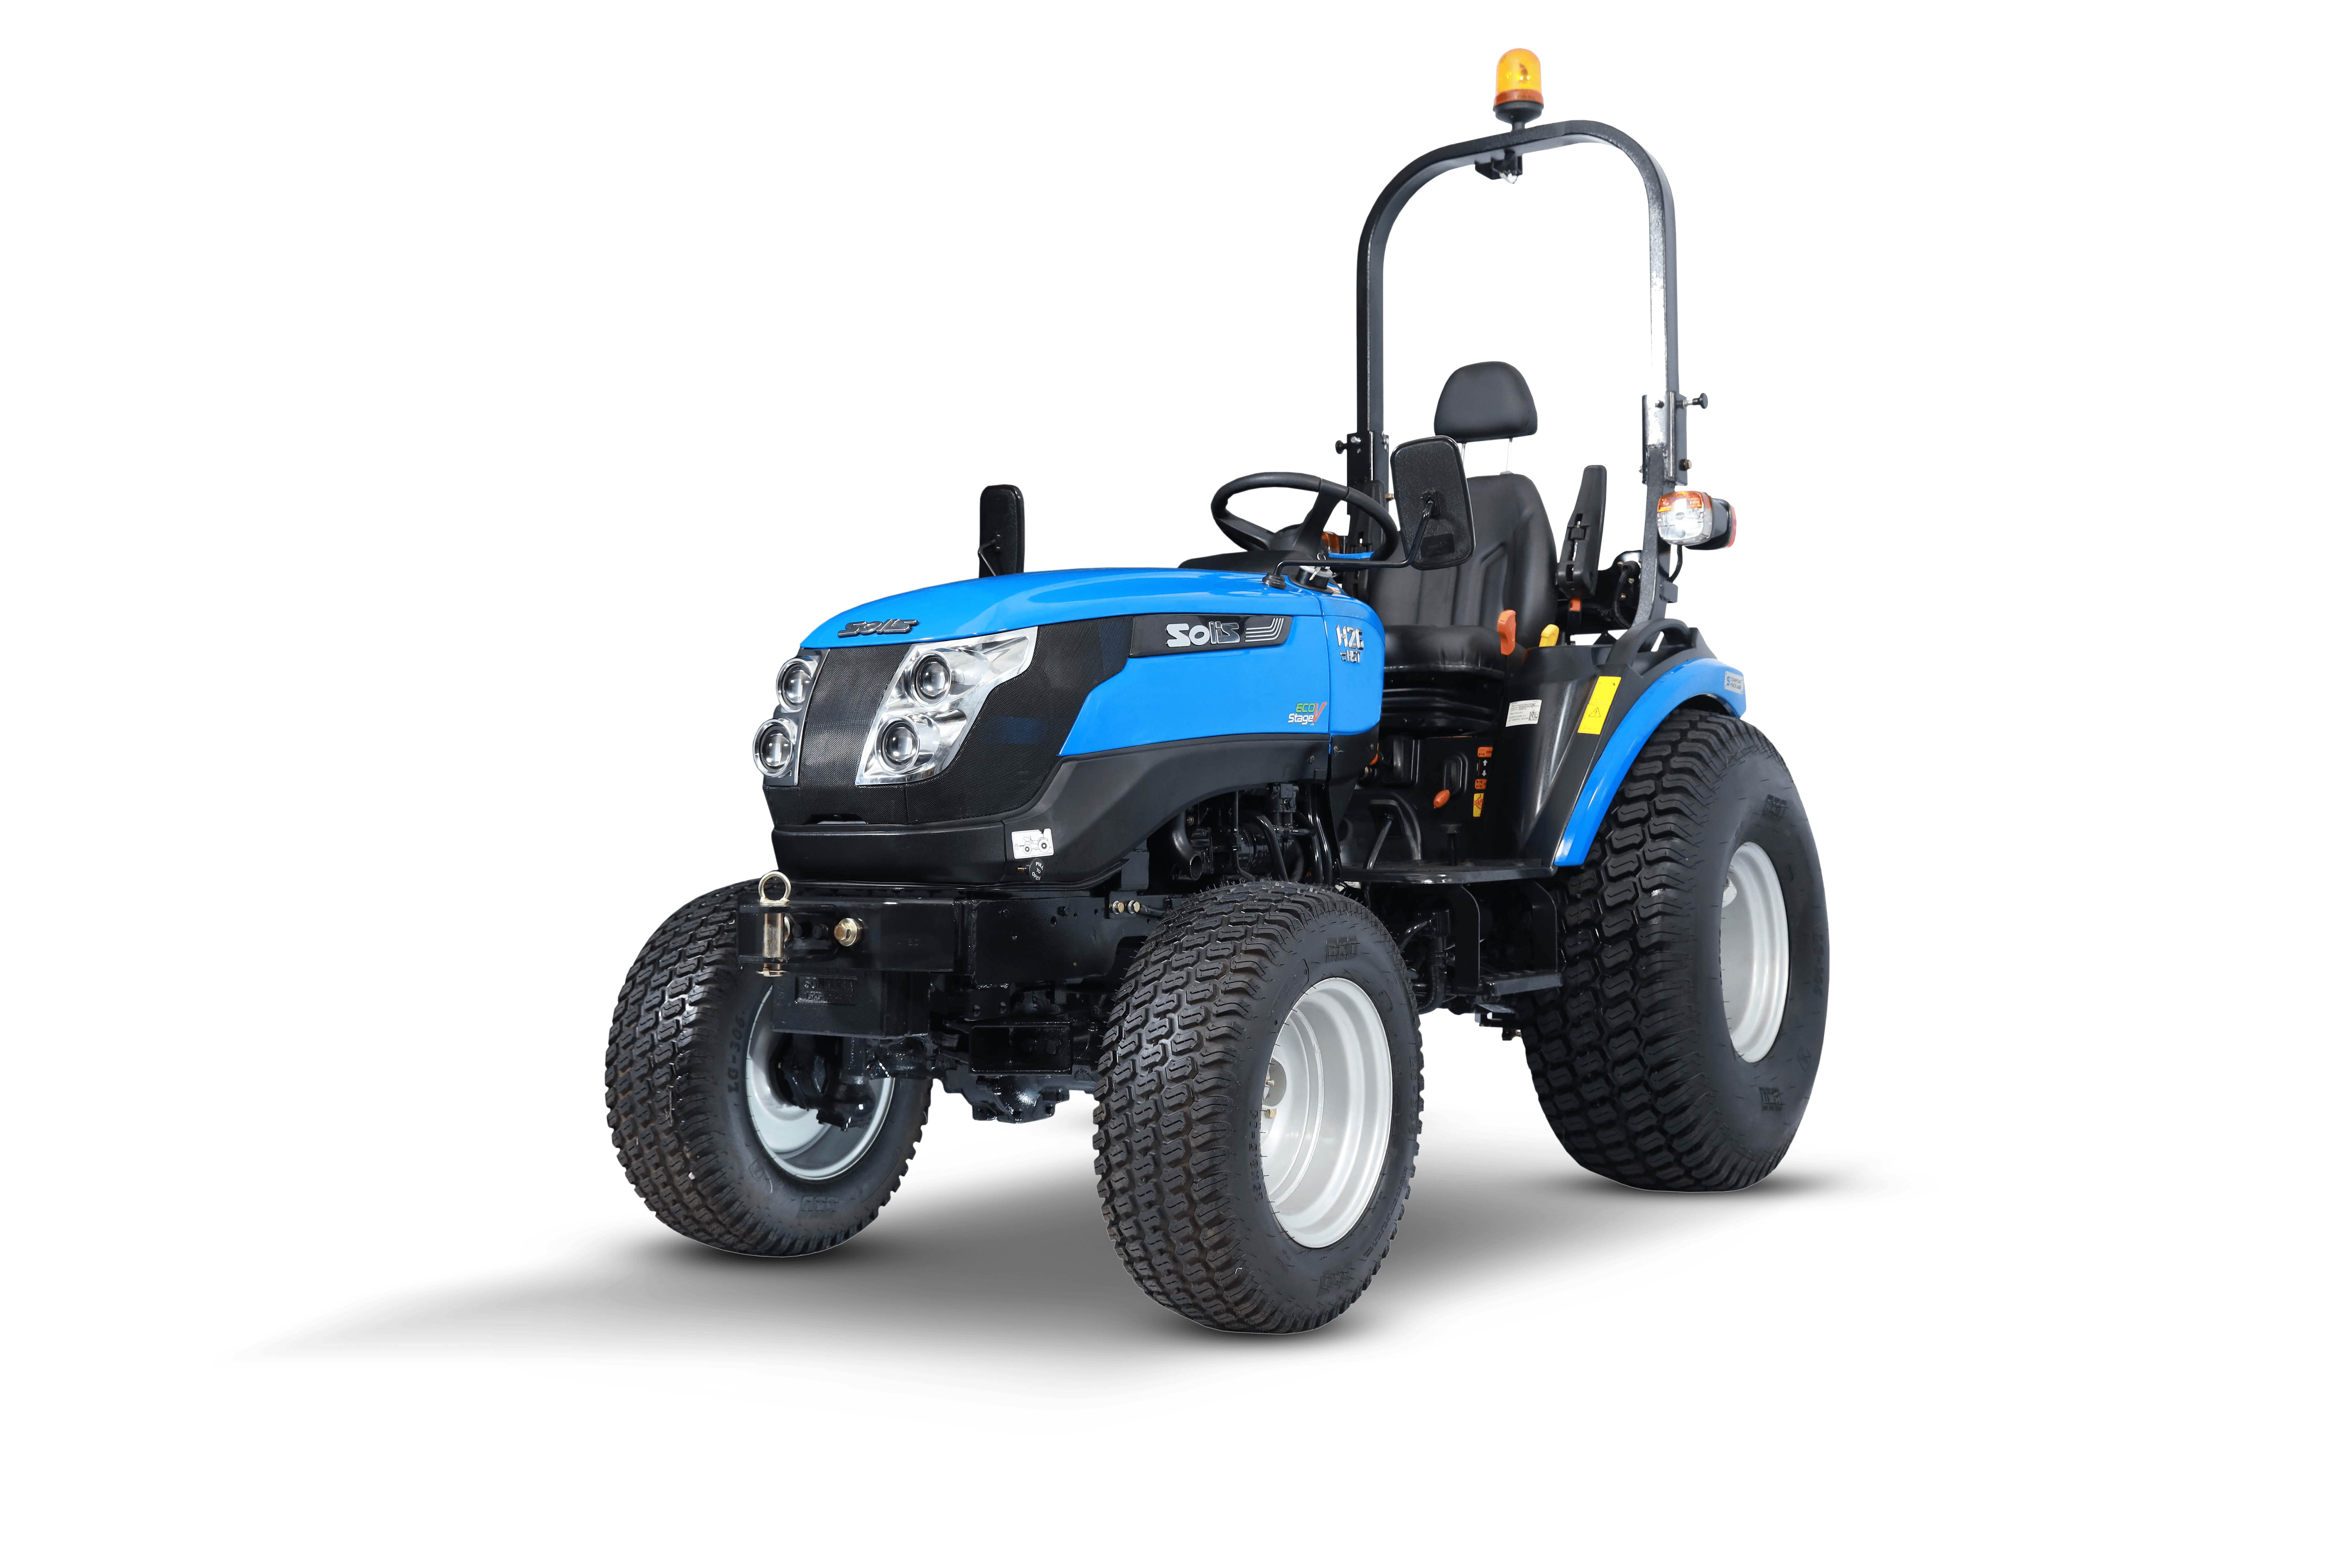 Get To Know About Multi-Functional Solis H26 Compact Utility Tractor